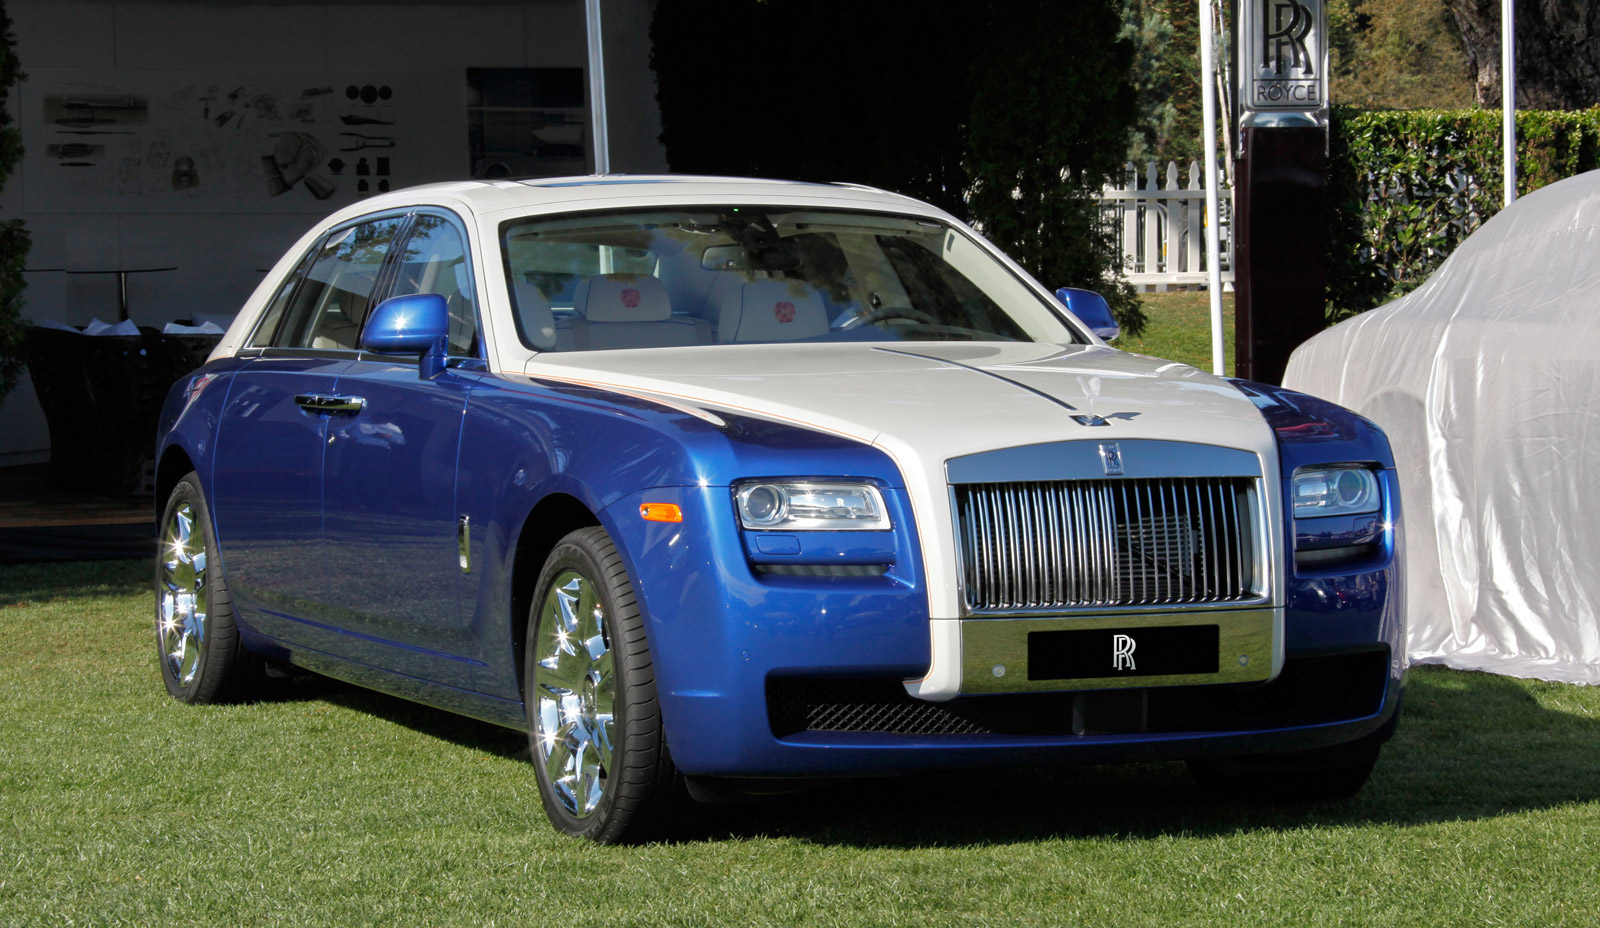 2013 Rolls-Royce Ghost Summary Review - The Car Connection